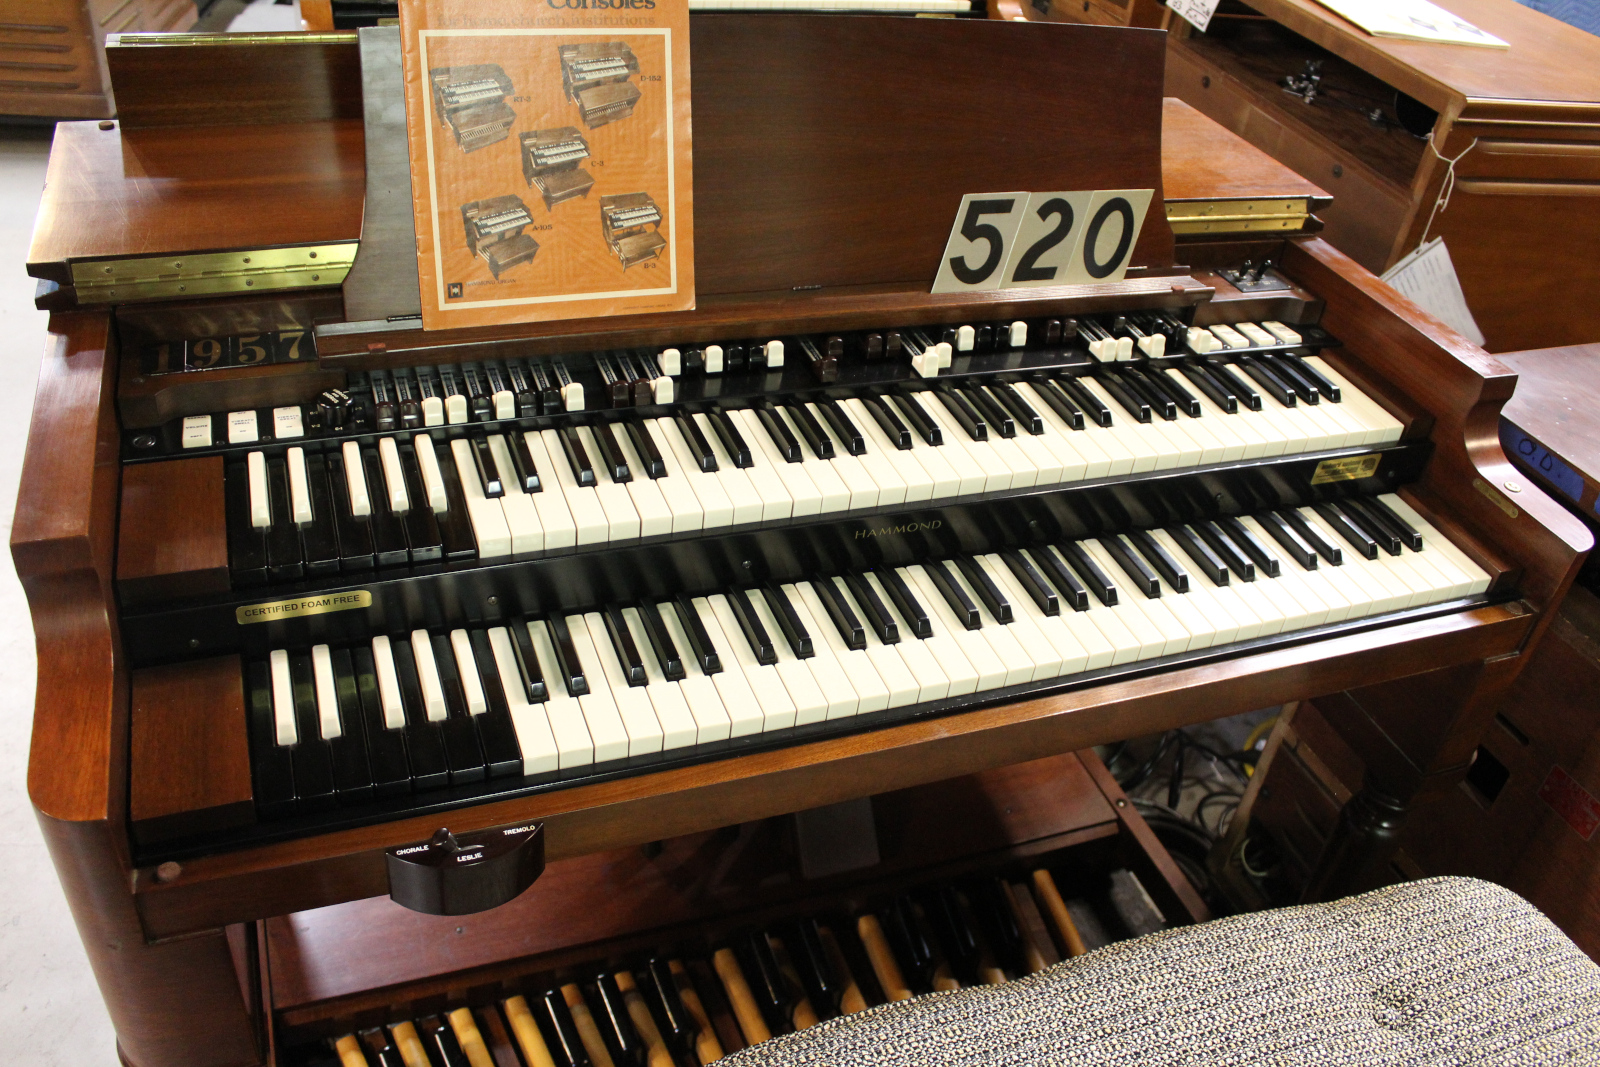 520 is a 1957 Hammond B-3 with some minor sun fading. Serial #65965